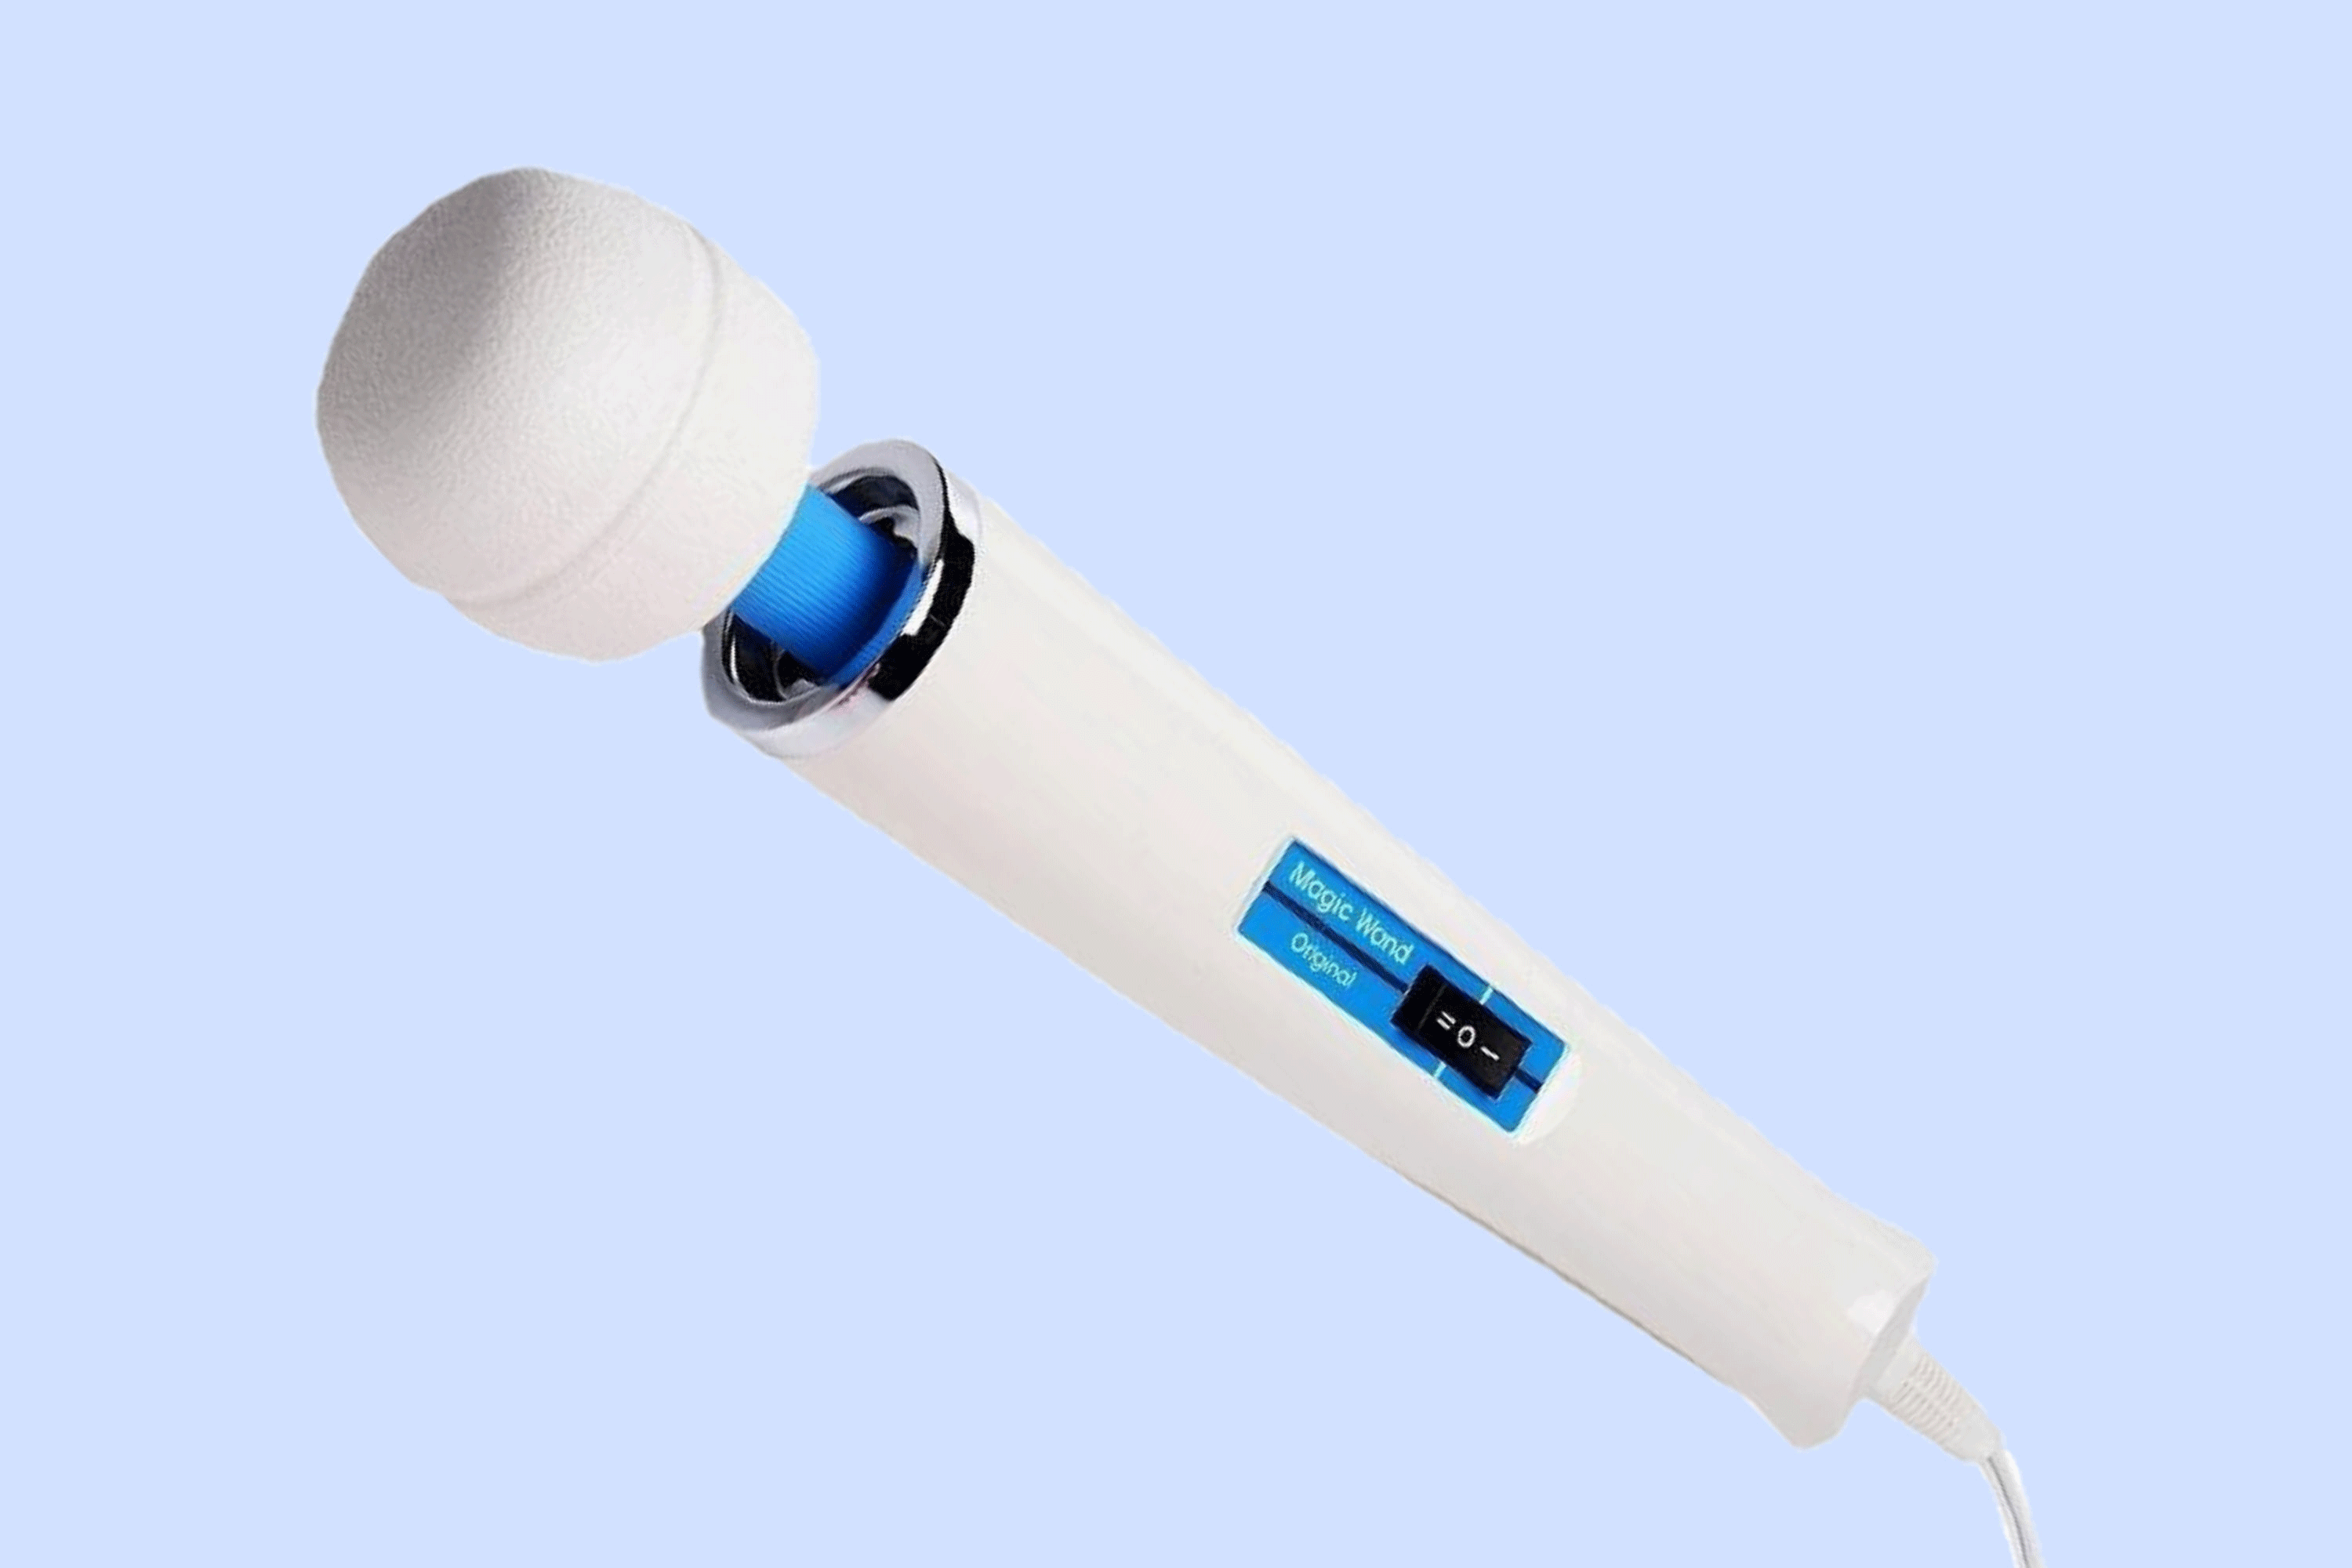 How The Hitachi Magic Wand Desire Dial Turned Me Into An Orgasm Scientist